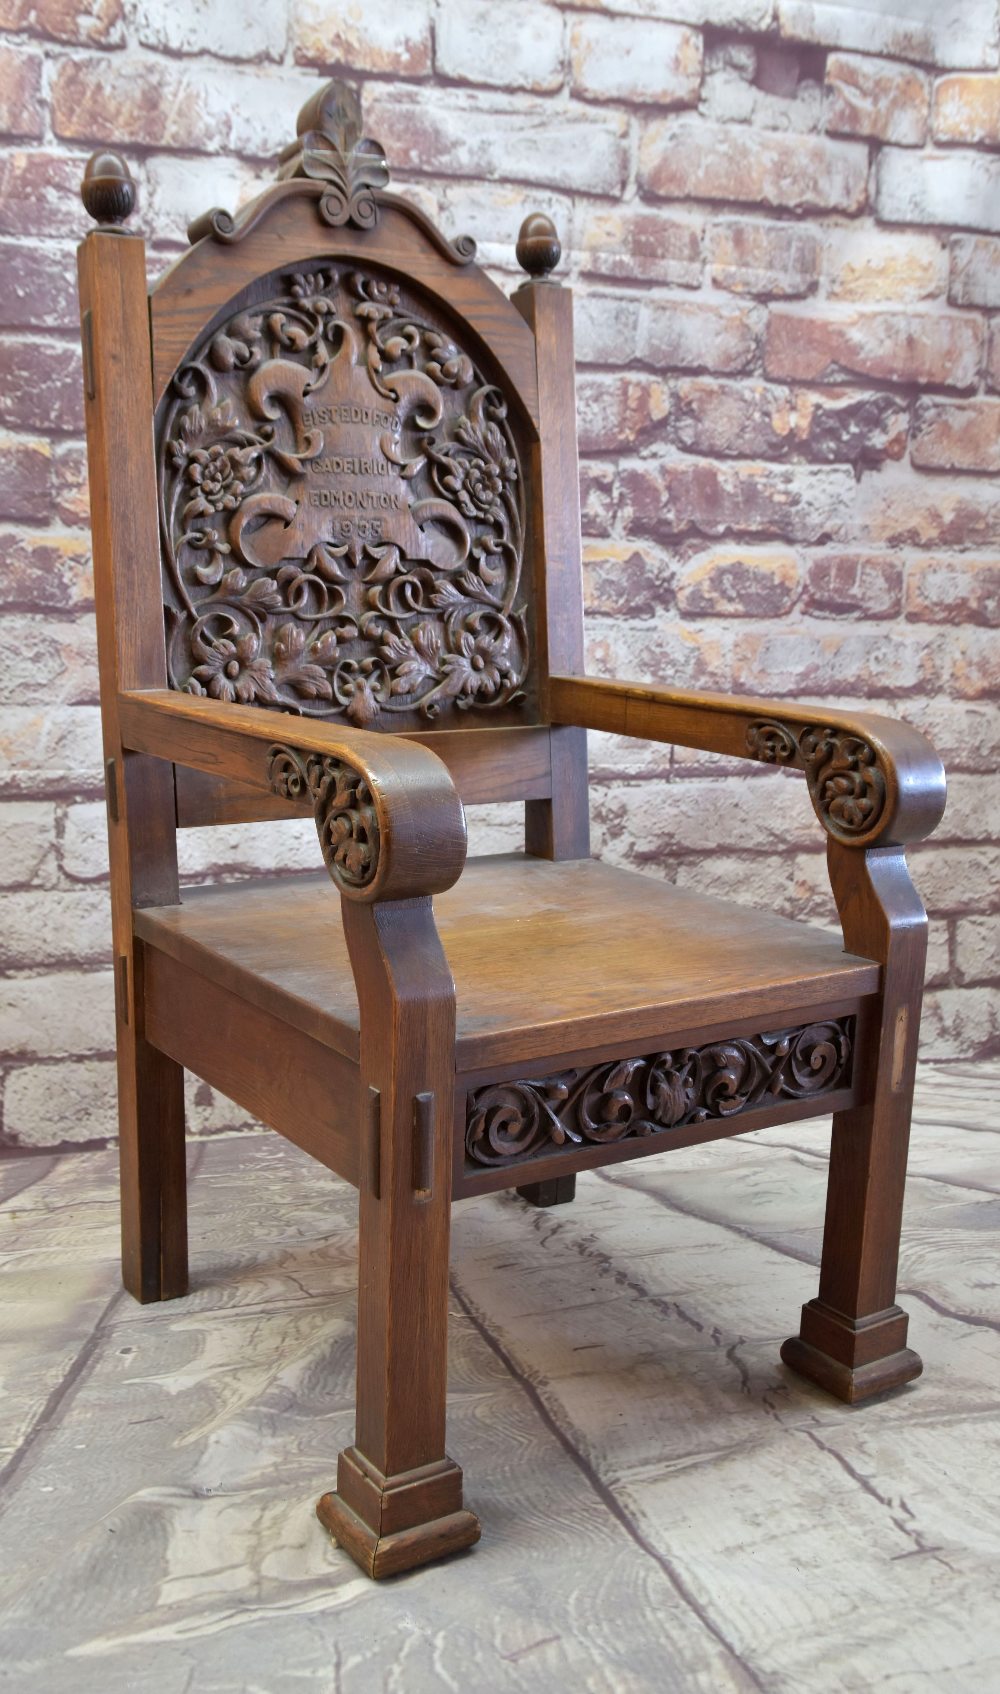 1935 EISTEDDFOD CHAIR FOR EDMONTON (NORTH LONDON) oak, carved inscription within cartouche and - Image 4 of 5